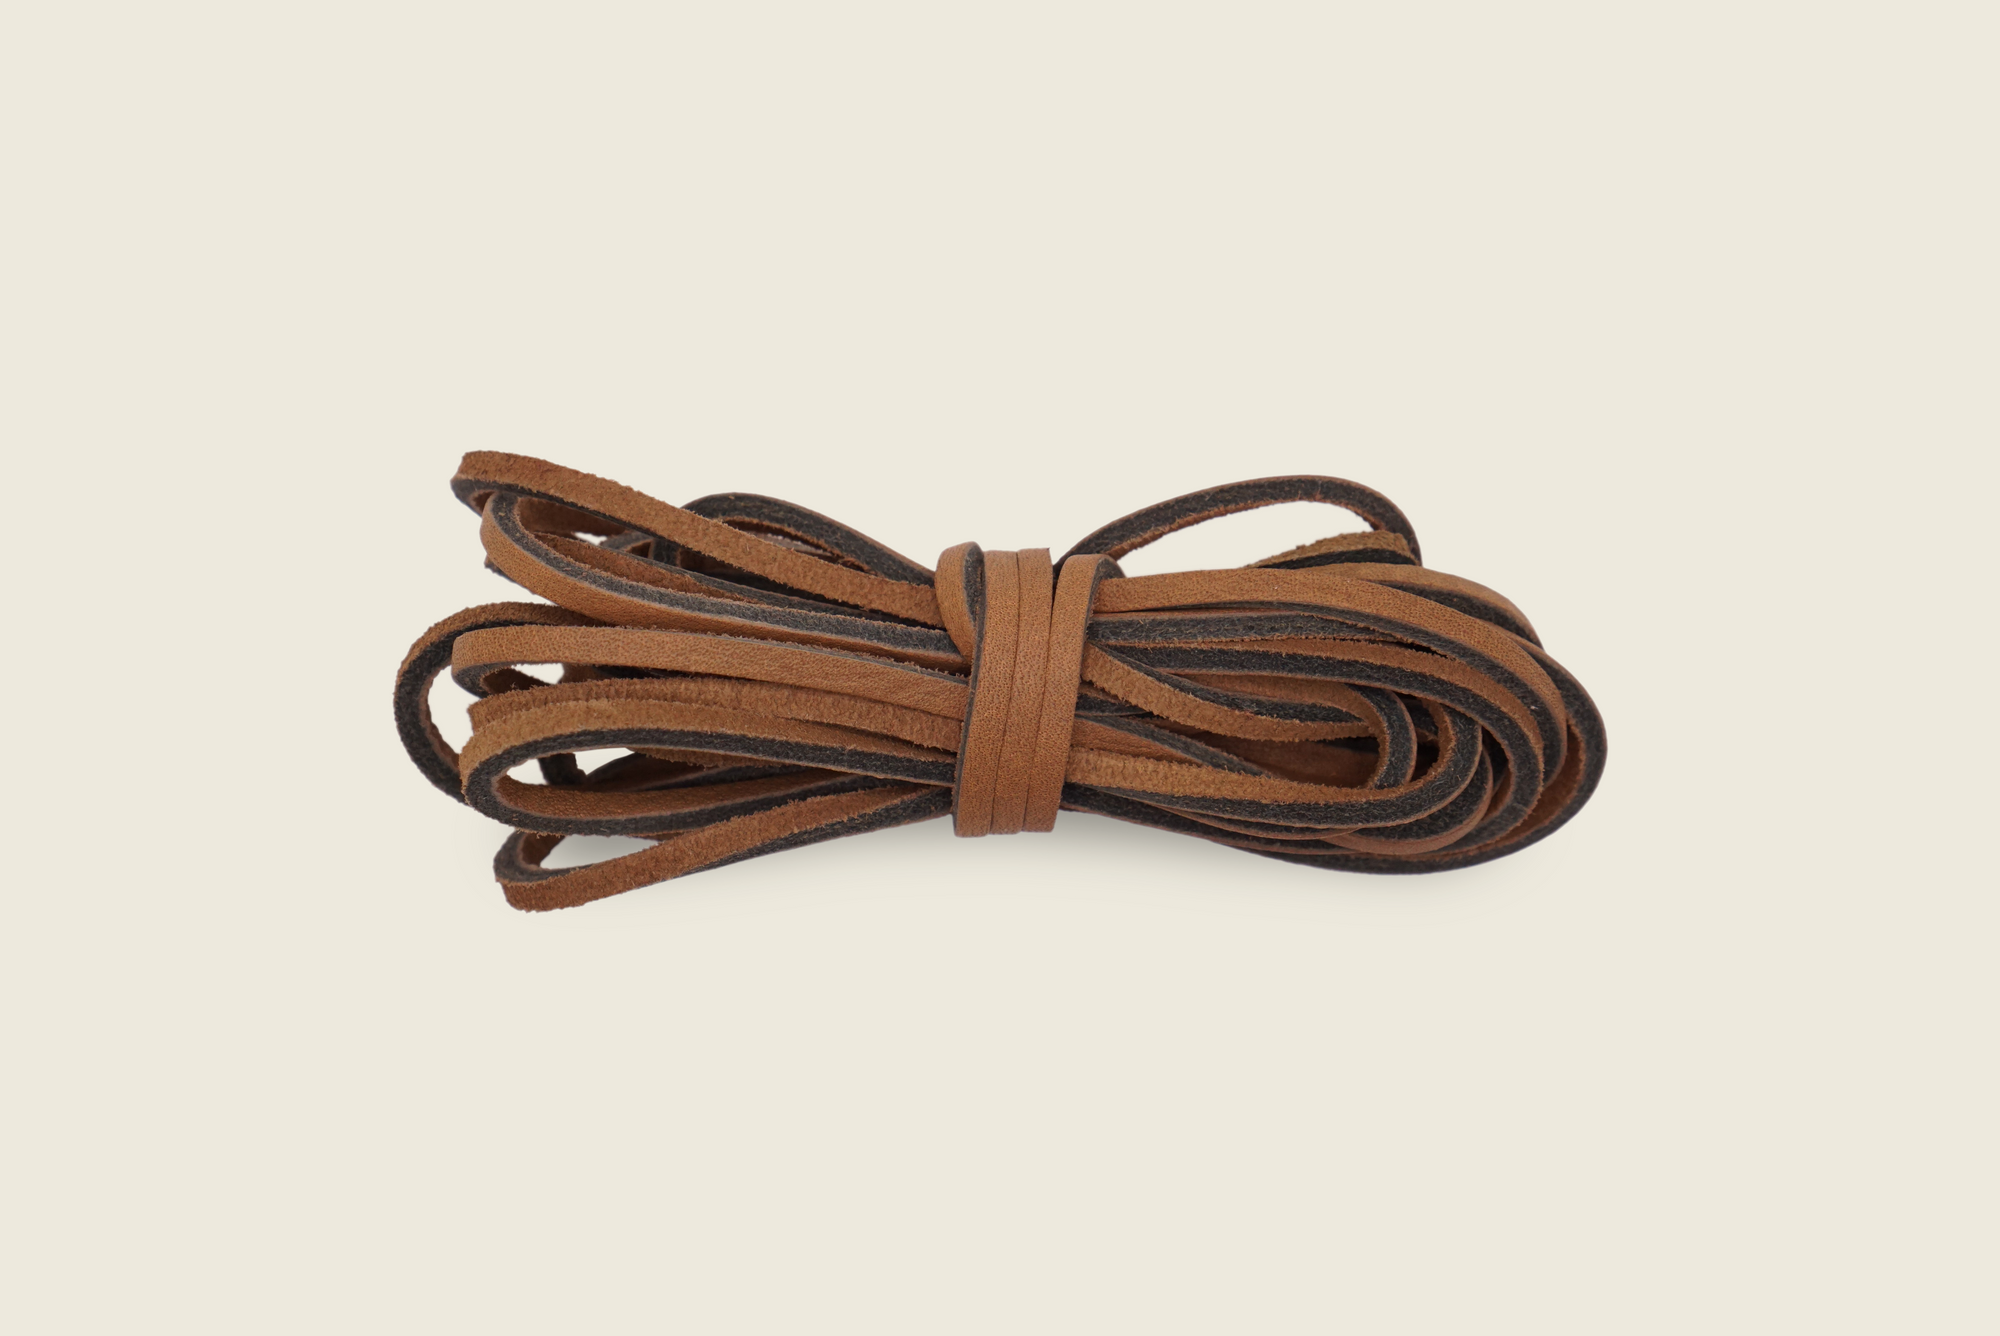 72 Rawhide Chrome Tanned Leather Boot Laces Gray Leather